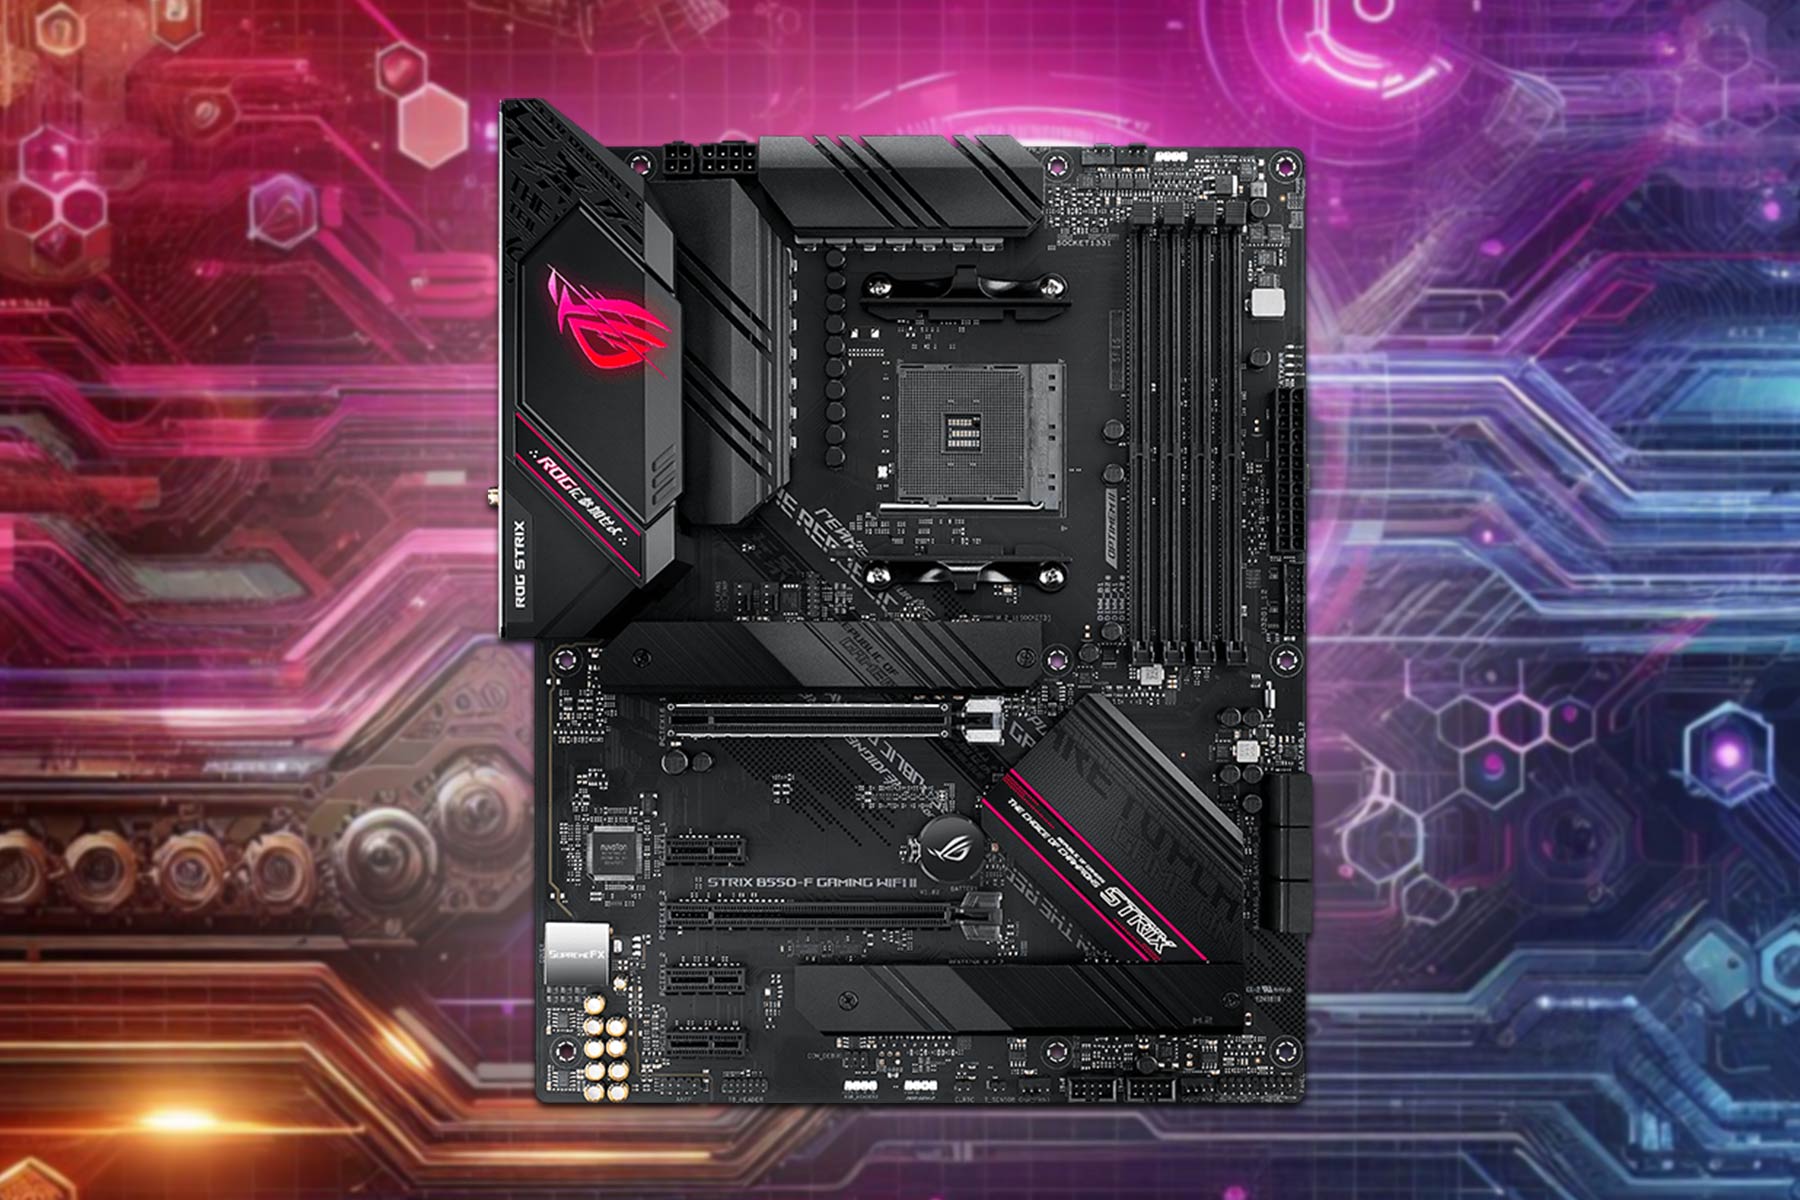 Build your dream PC with this ASUS motherboard and liquid cooling discounts